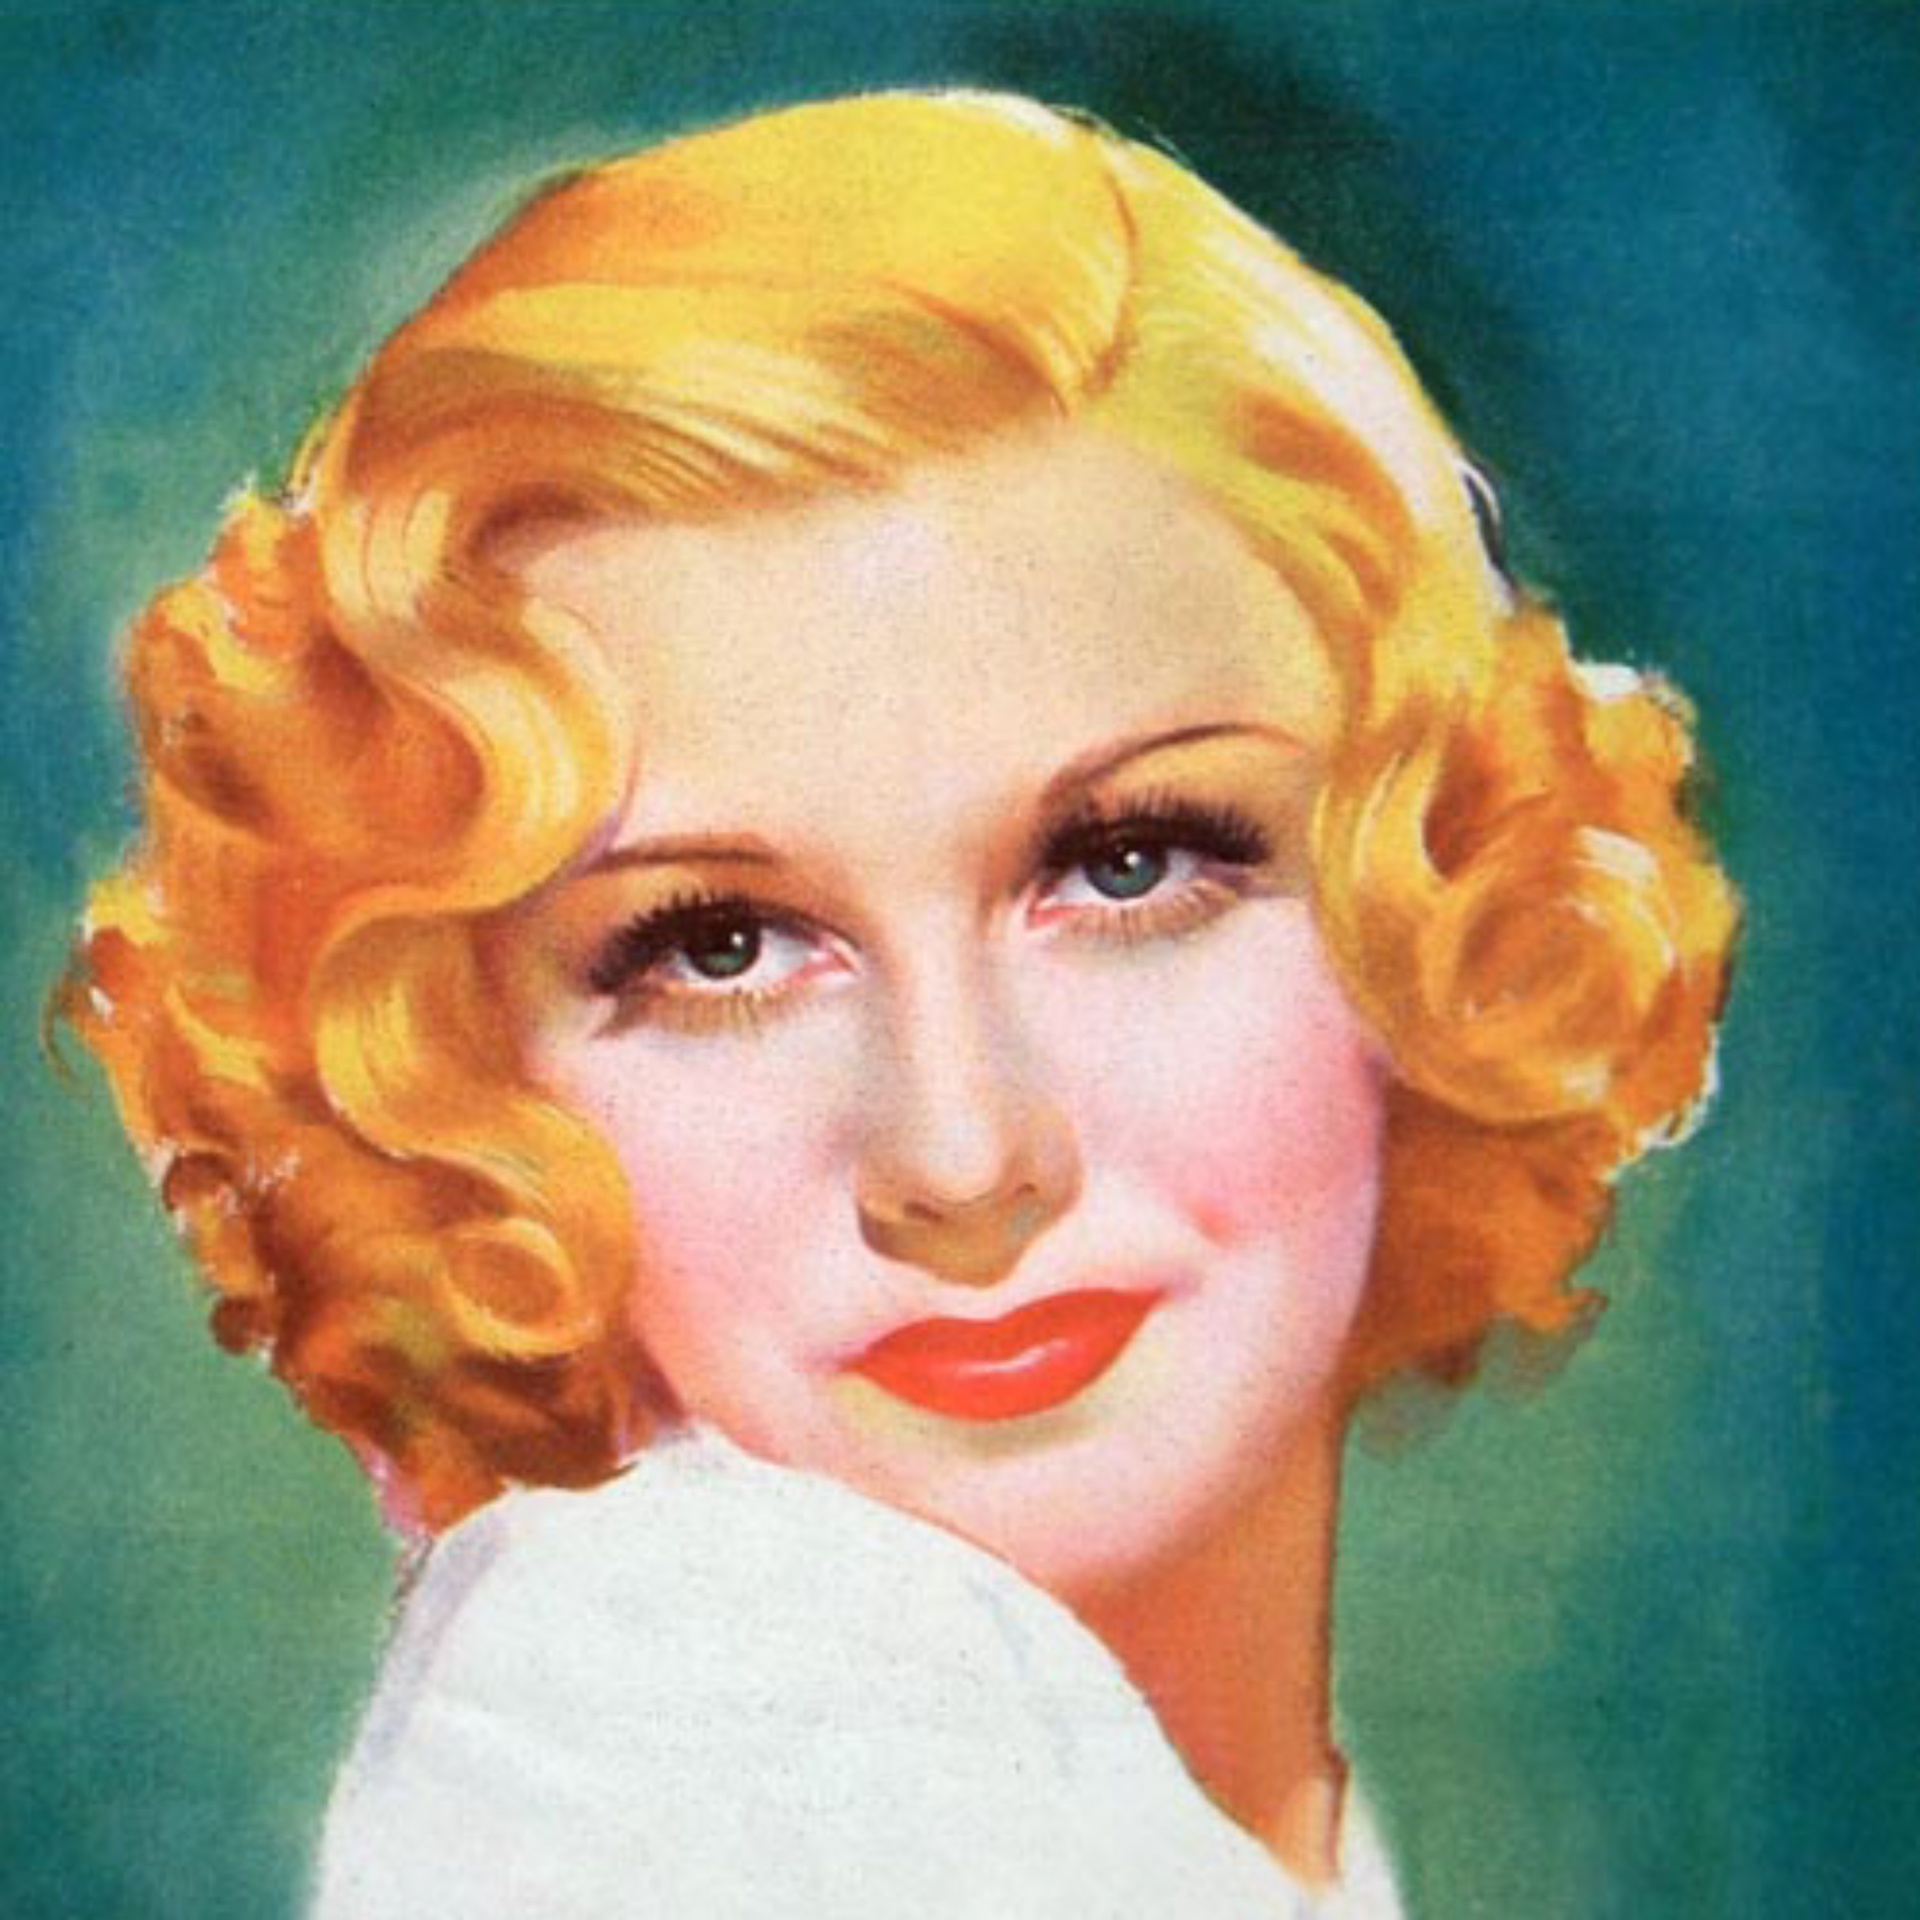 Vintage 1950 S Actress Blonde Woman Free Image From Needpix Com